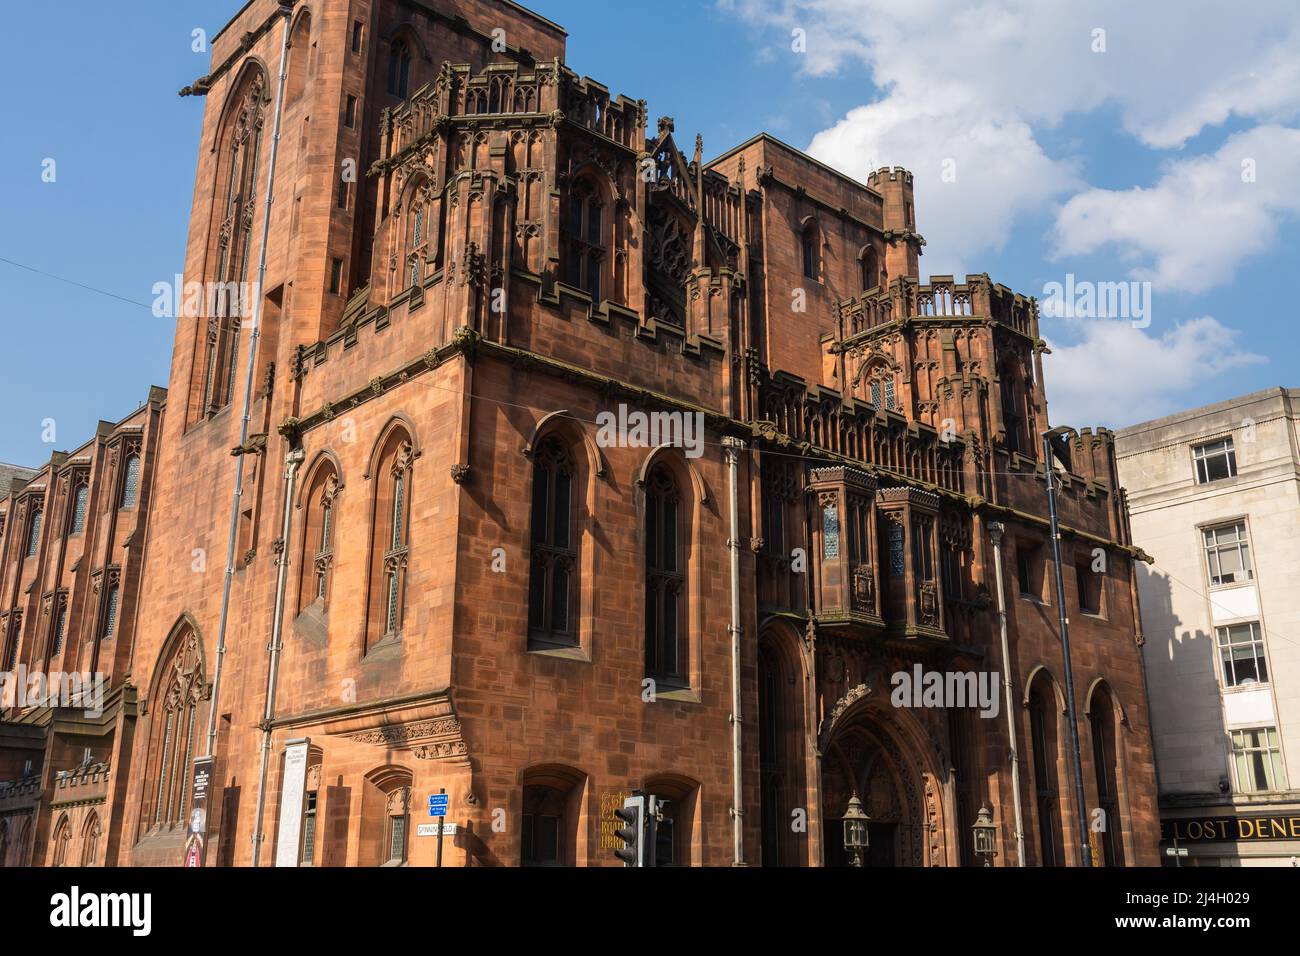 Manchester, England - United Kingdom - March 23rd, 2022: Exterior of the John Rylands Library, originally opened in 1899, on a beautiful afternoon. Stock Photo